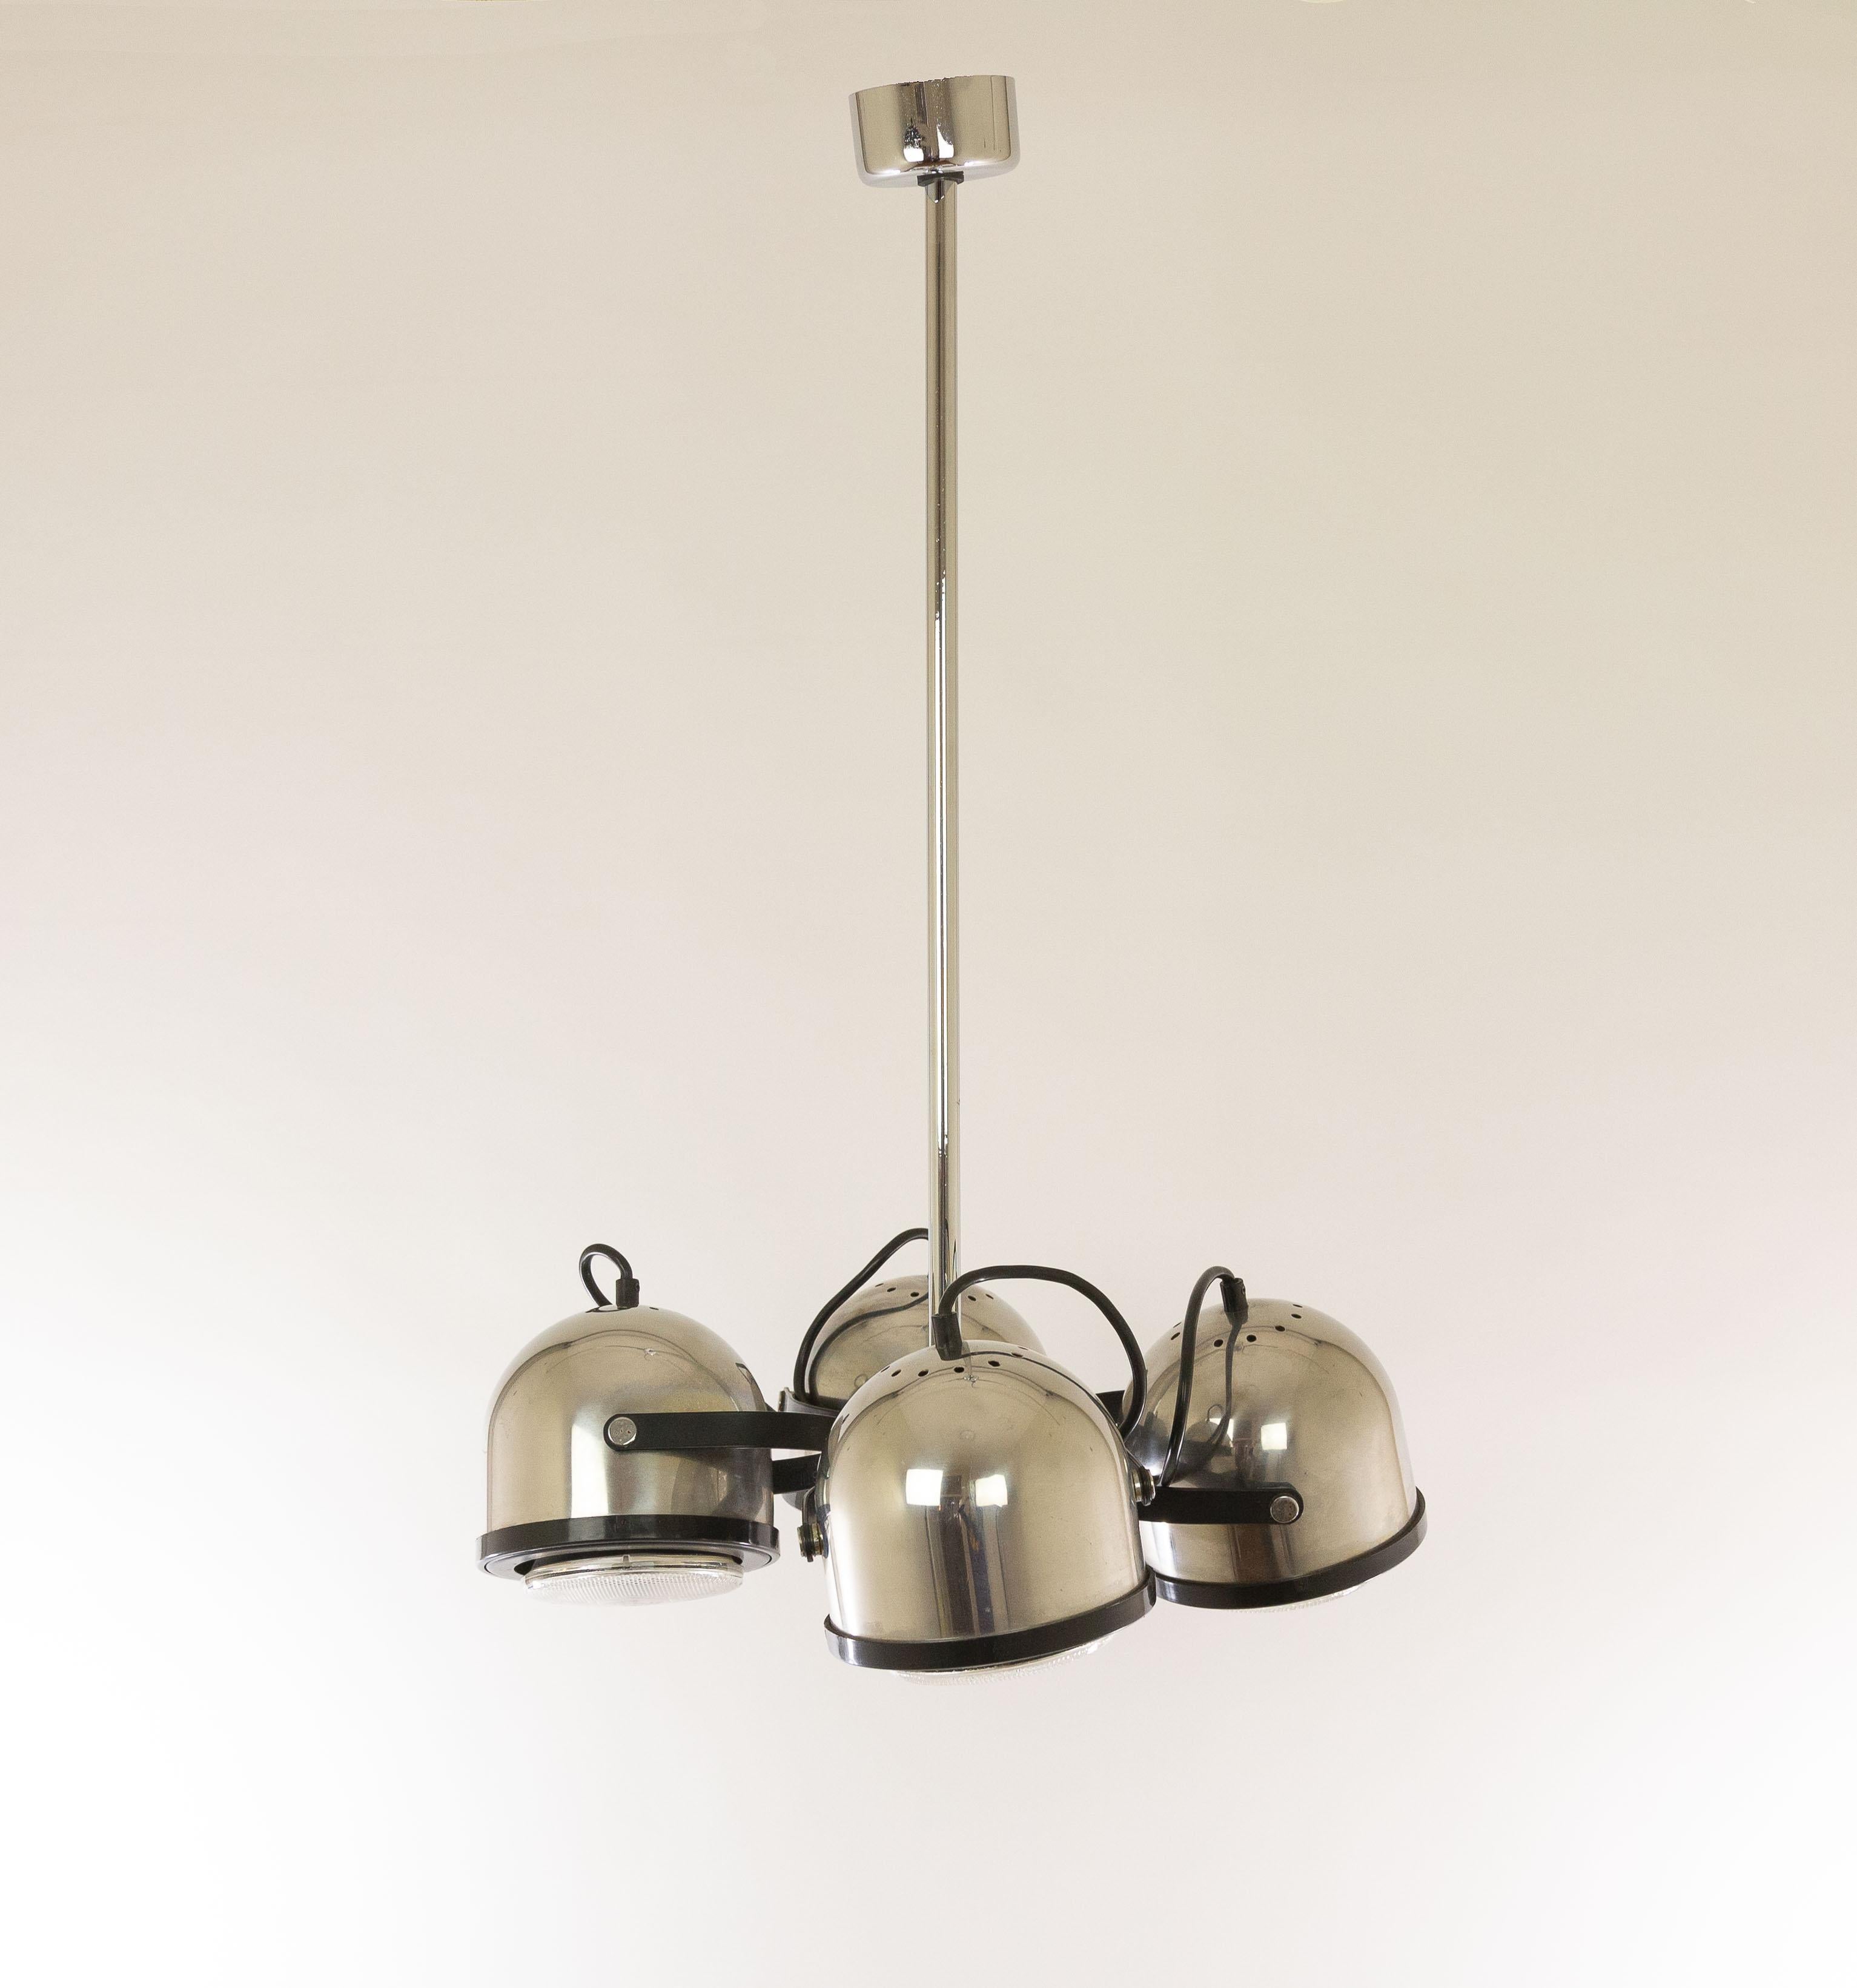 Chandelier with four swiveling spots made of chromed metal designed by Gae Aulenti and Livio Castiglioni for Stilnovo in the 1970s.

As described in a catalogue by Stilnovo this model, 6205, has been designed by Gae Aulenti and Livio Castiglioni